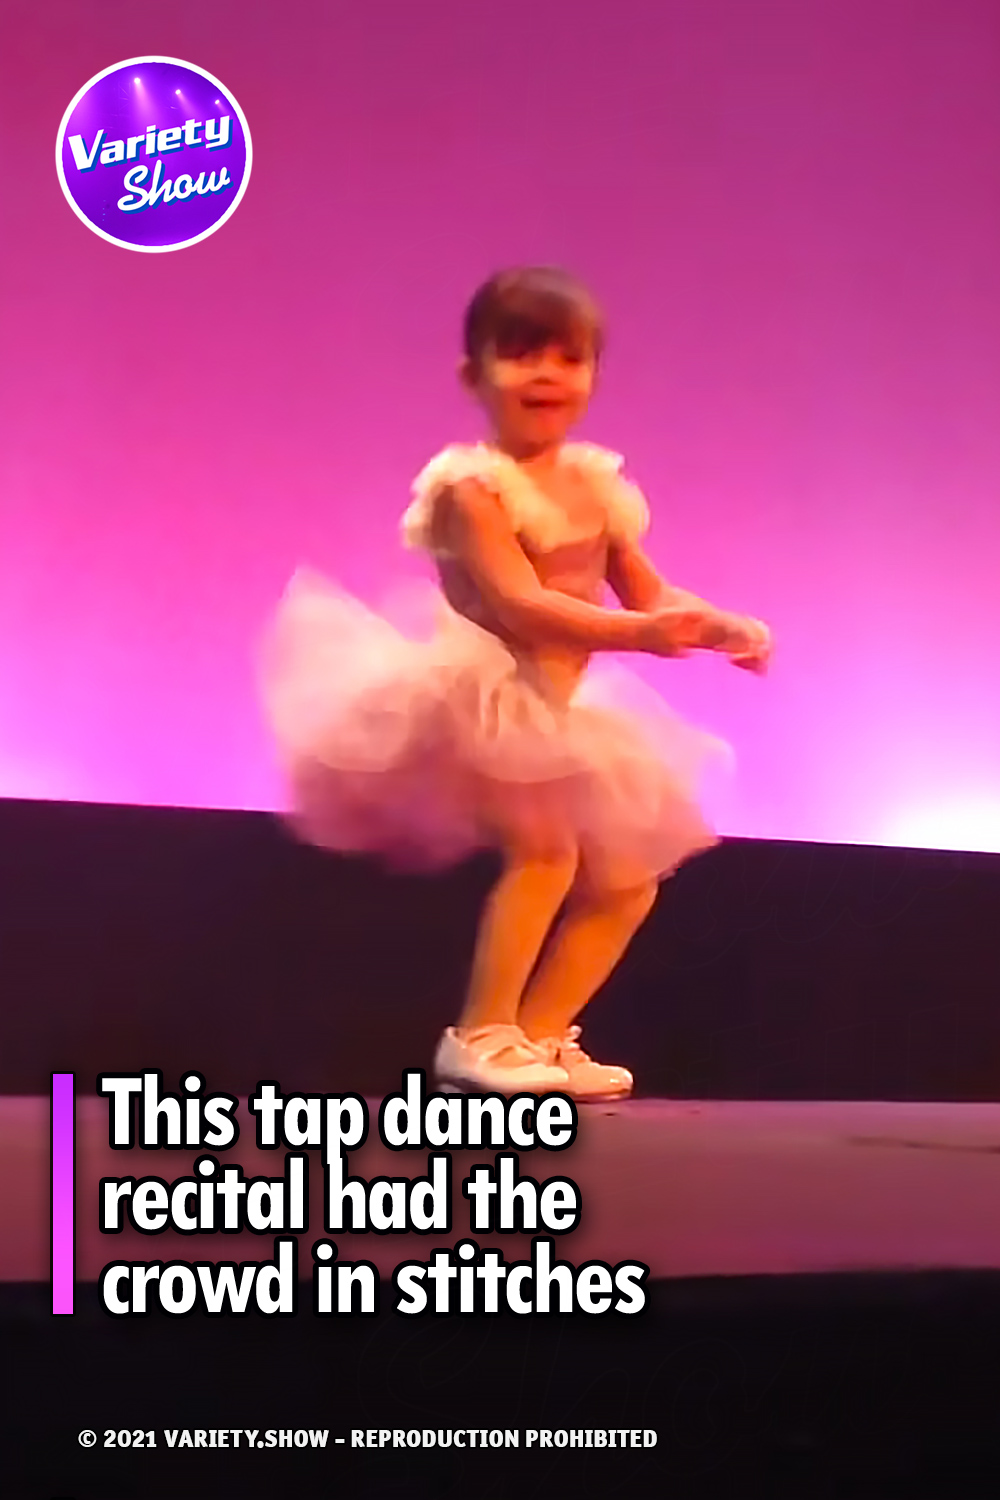 This tap dance recital had the crowd in stitches